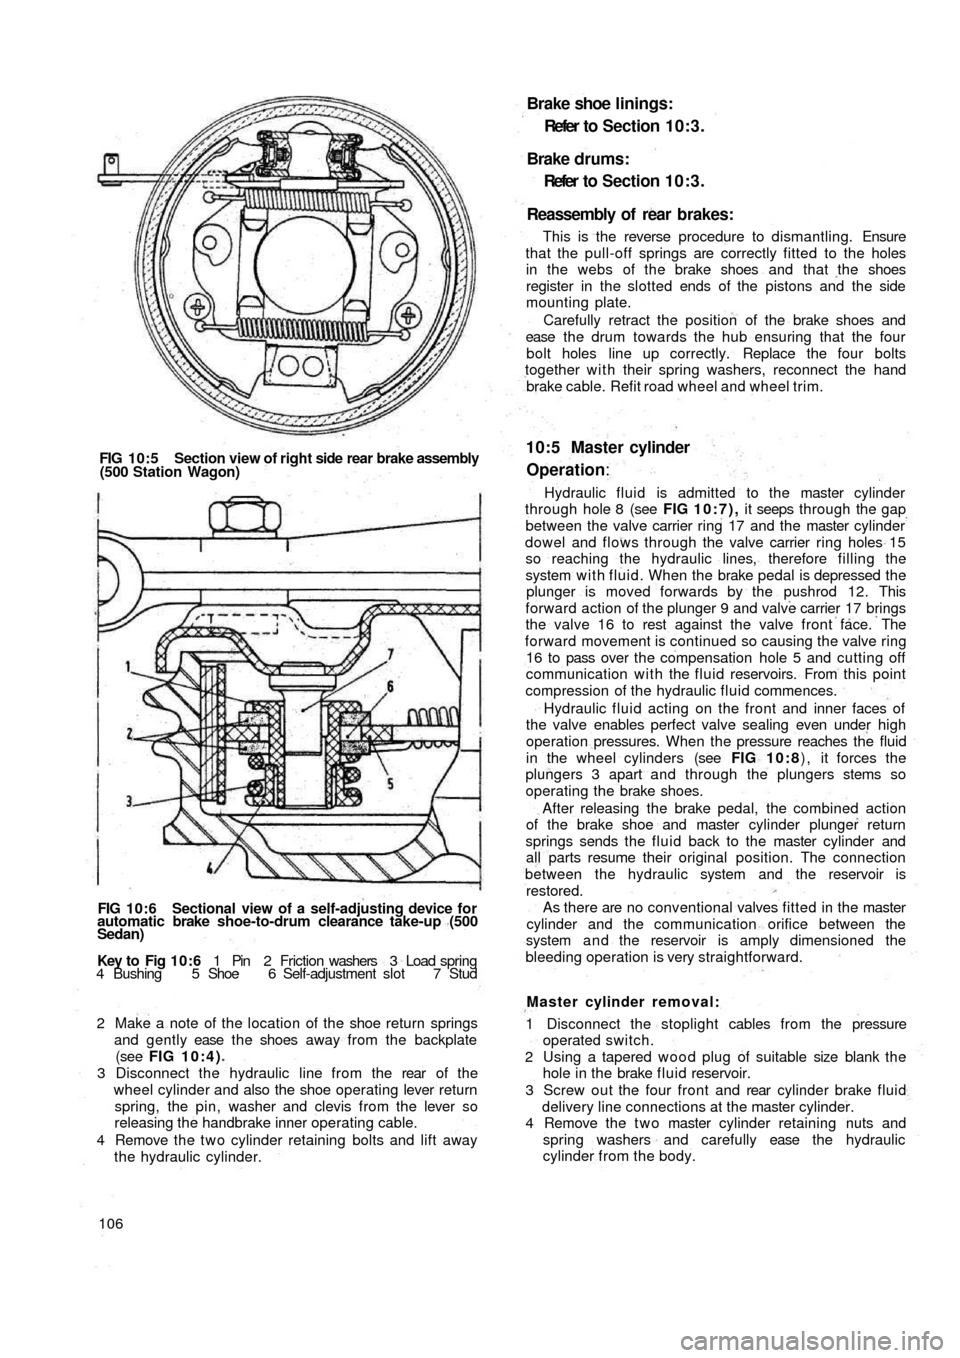 FIAT 500 1967 1.G Workshop Manual FIG 10:5 Section view of right side rear brake assembly
(500 Station Wagon)
FIG 10:6 Sectional view of a self-adjusting device for
automatic brake shoe-to-drum clearance take-up (500
Sedan)
Key  to   